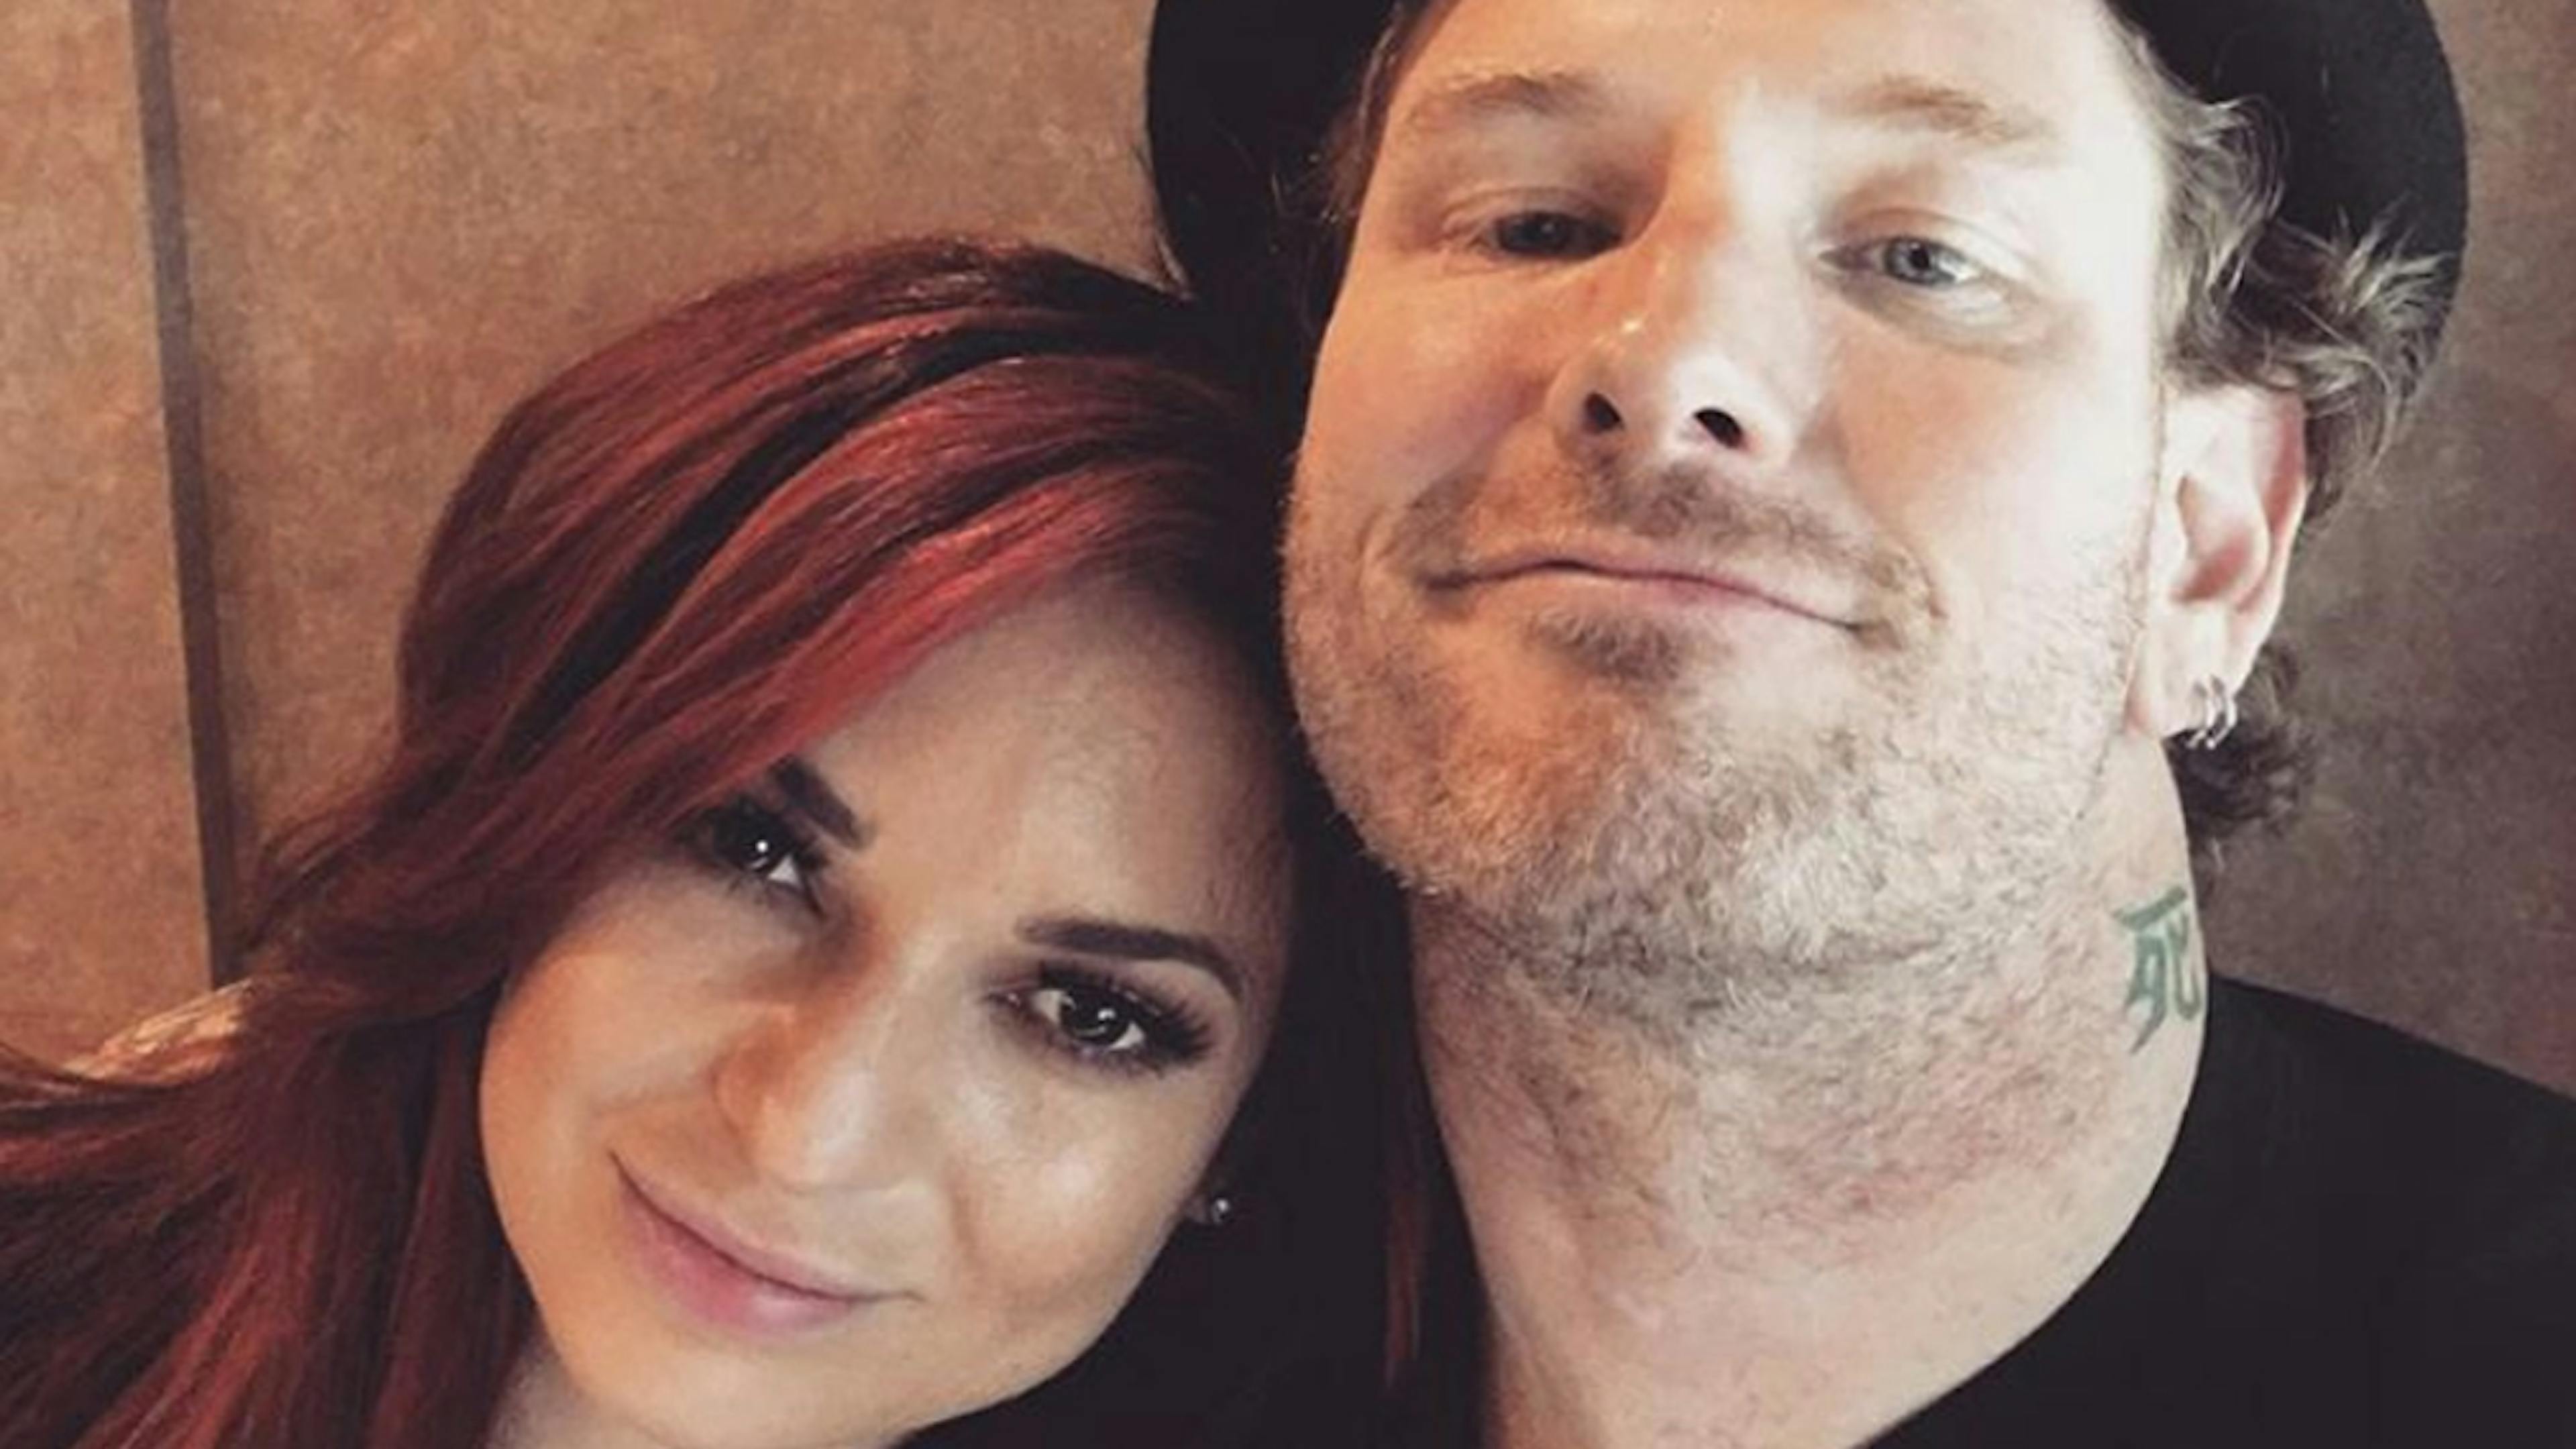 Corey Taylor Working On New Project With Wife Alicia